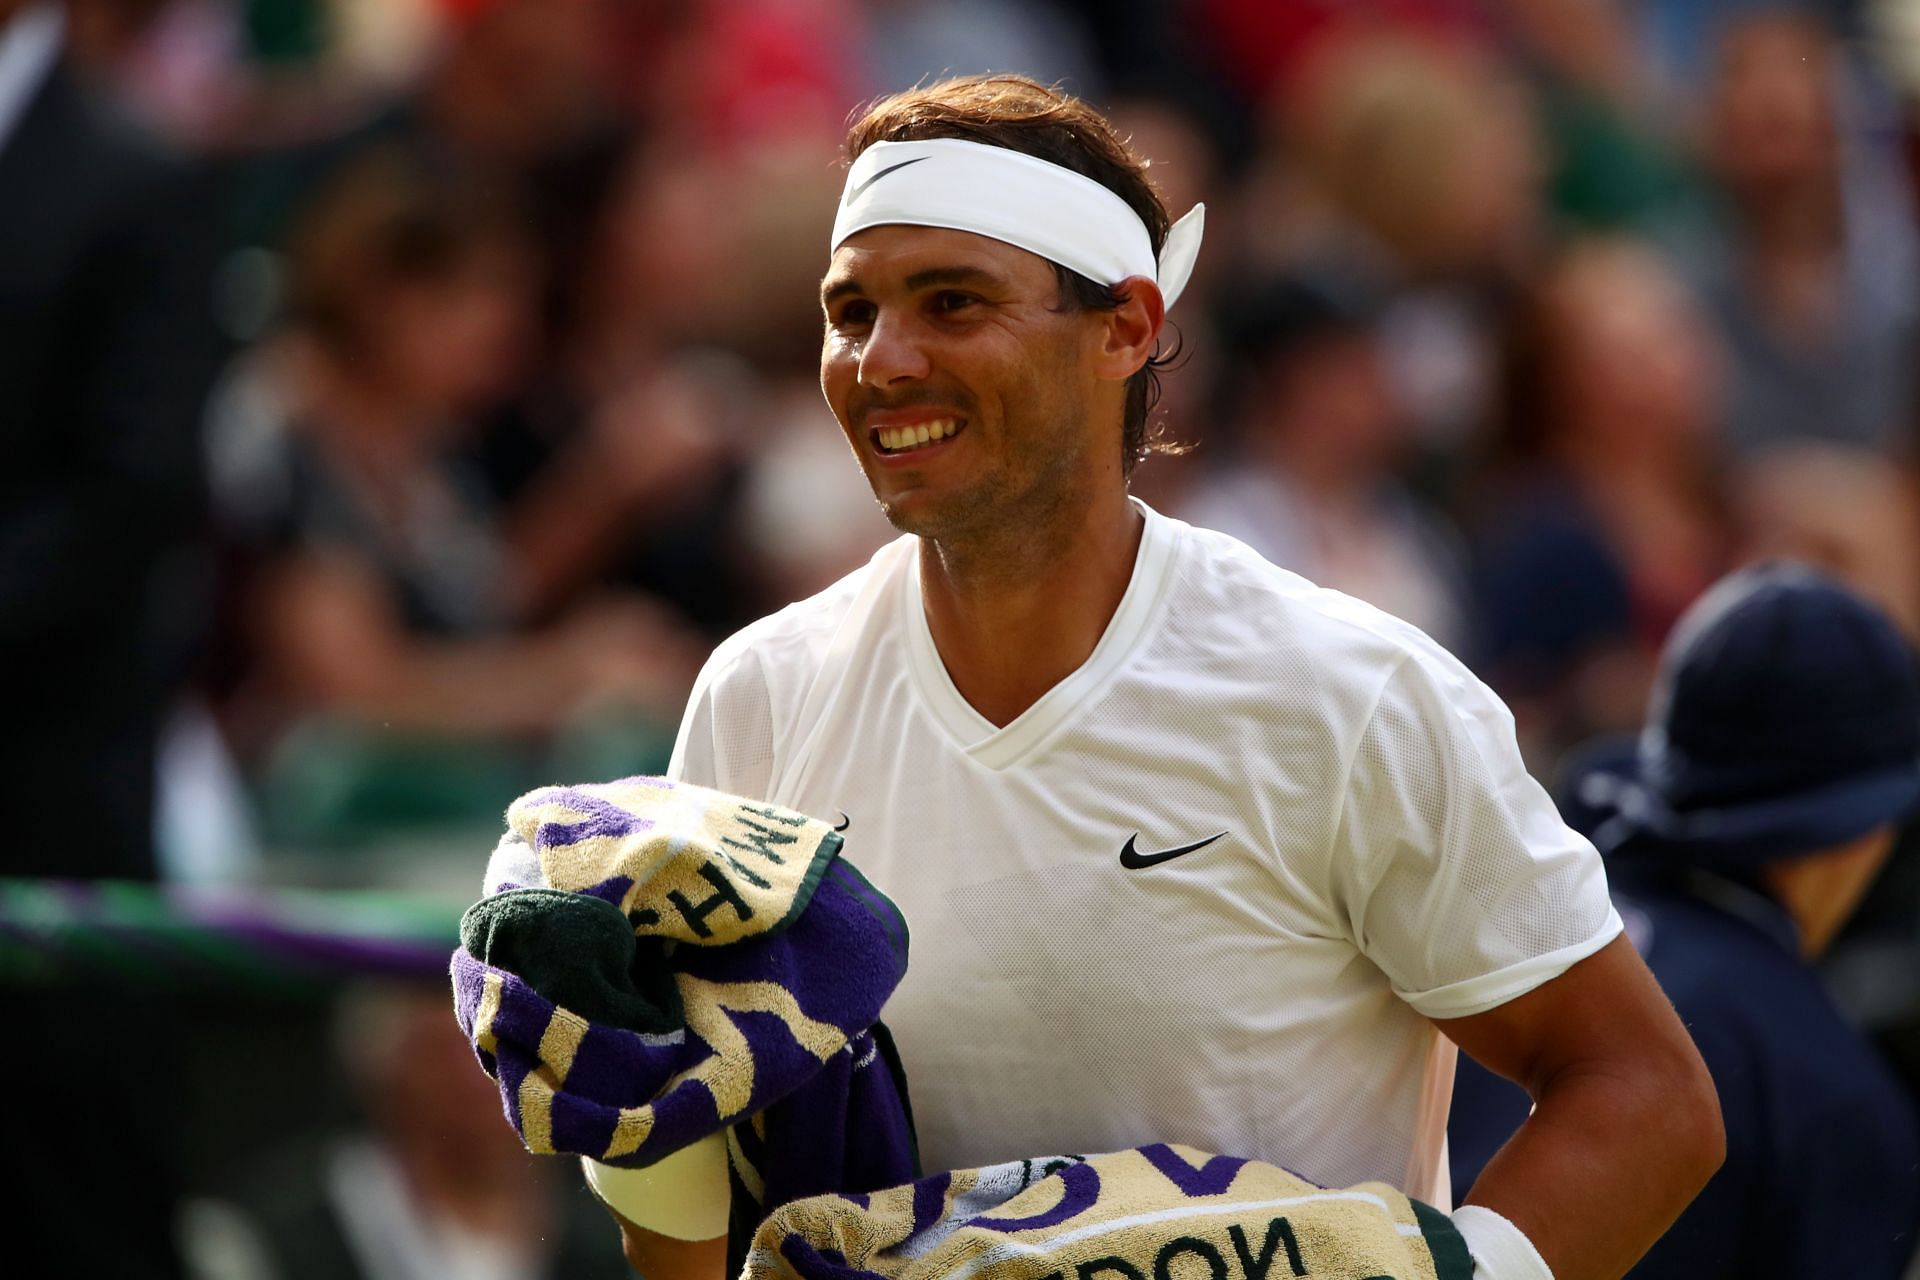 Rafael Nadal is aiming to win his third Wimbledon title.